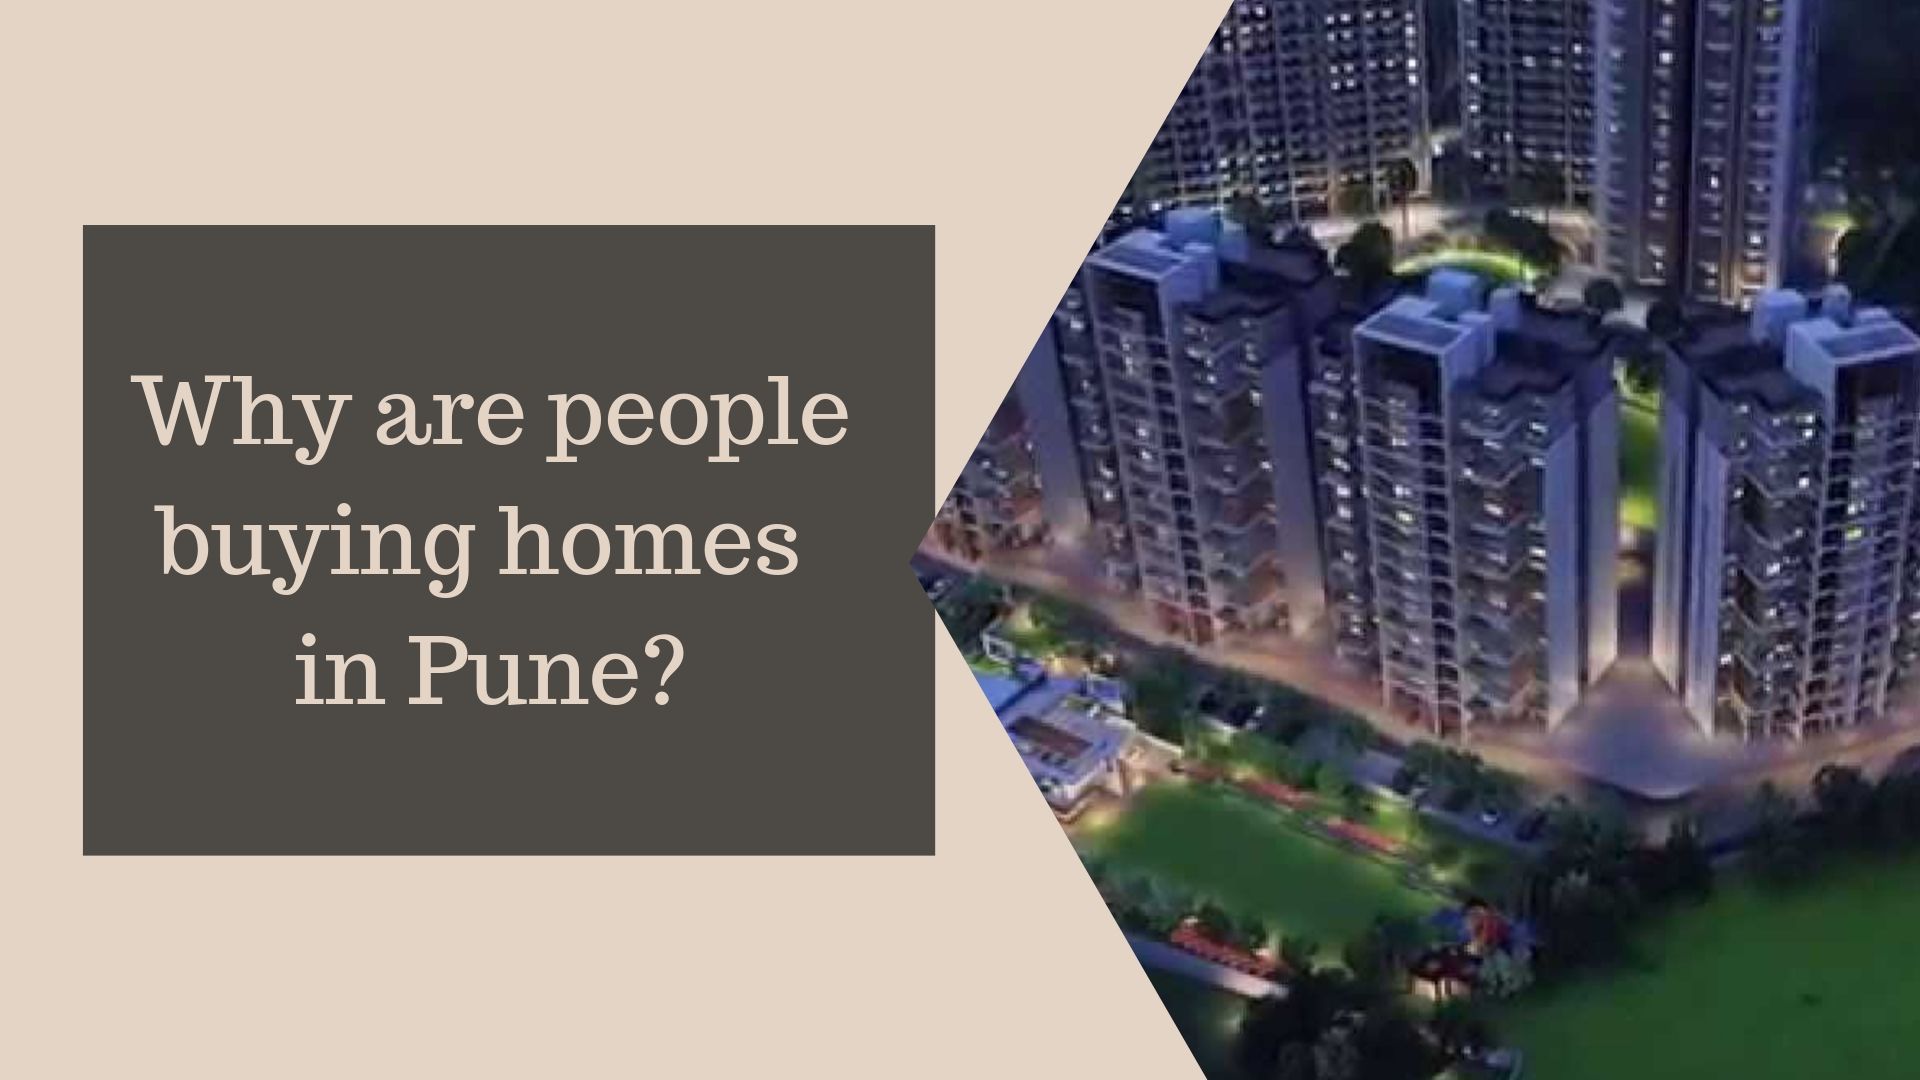 Why are people buying homes in Pune?